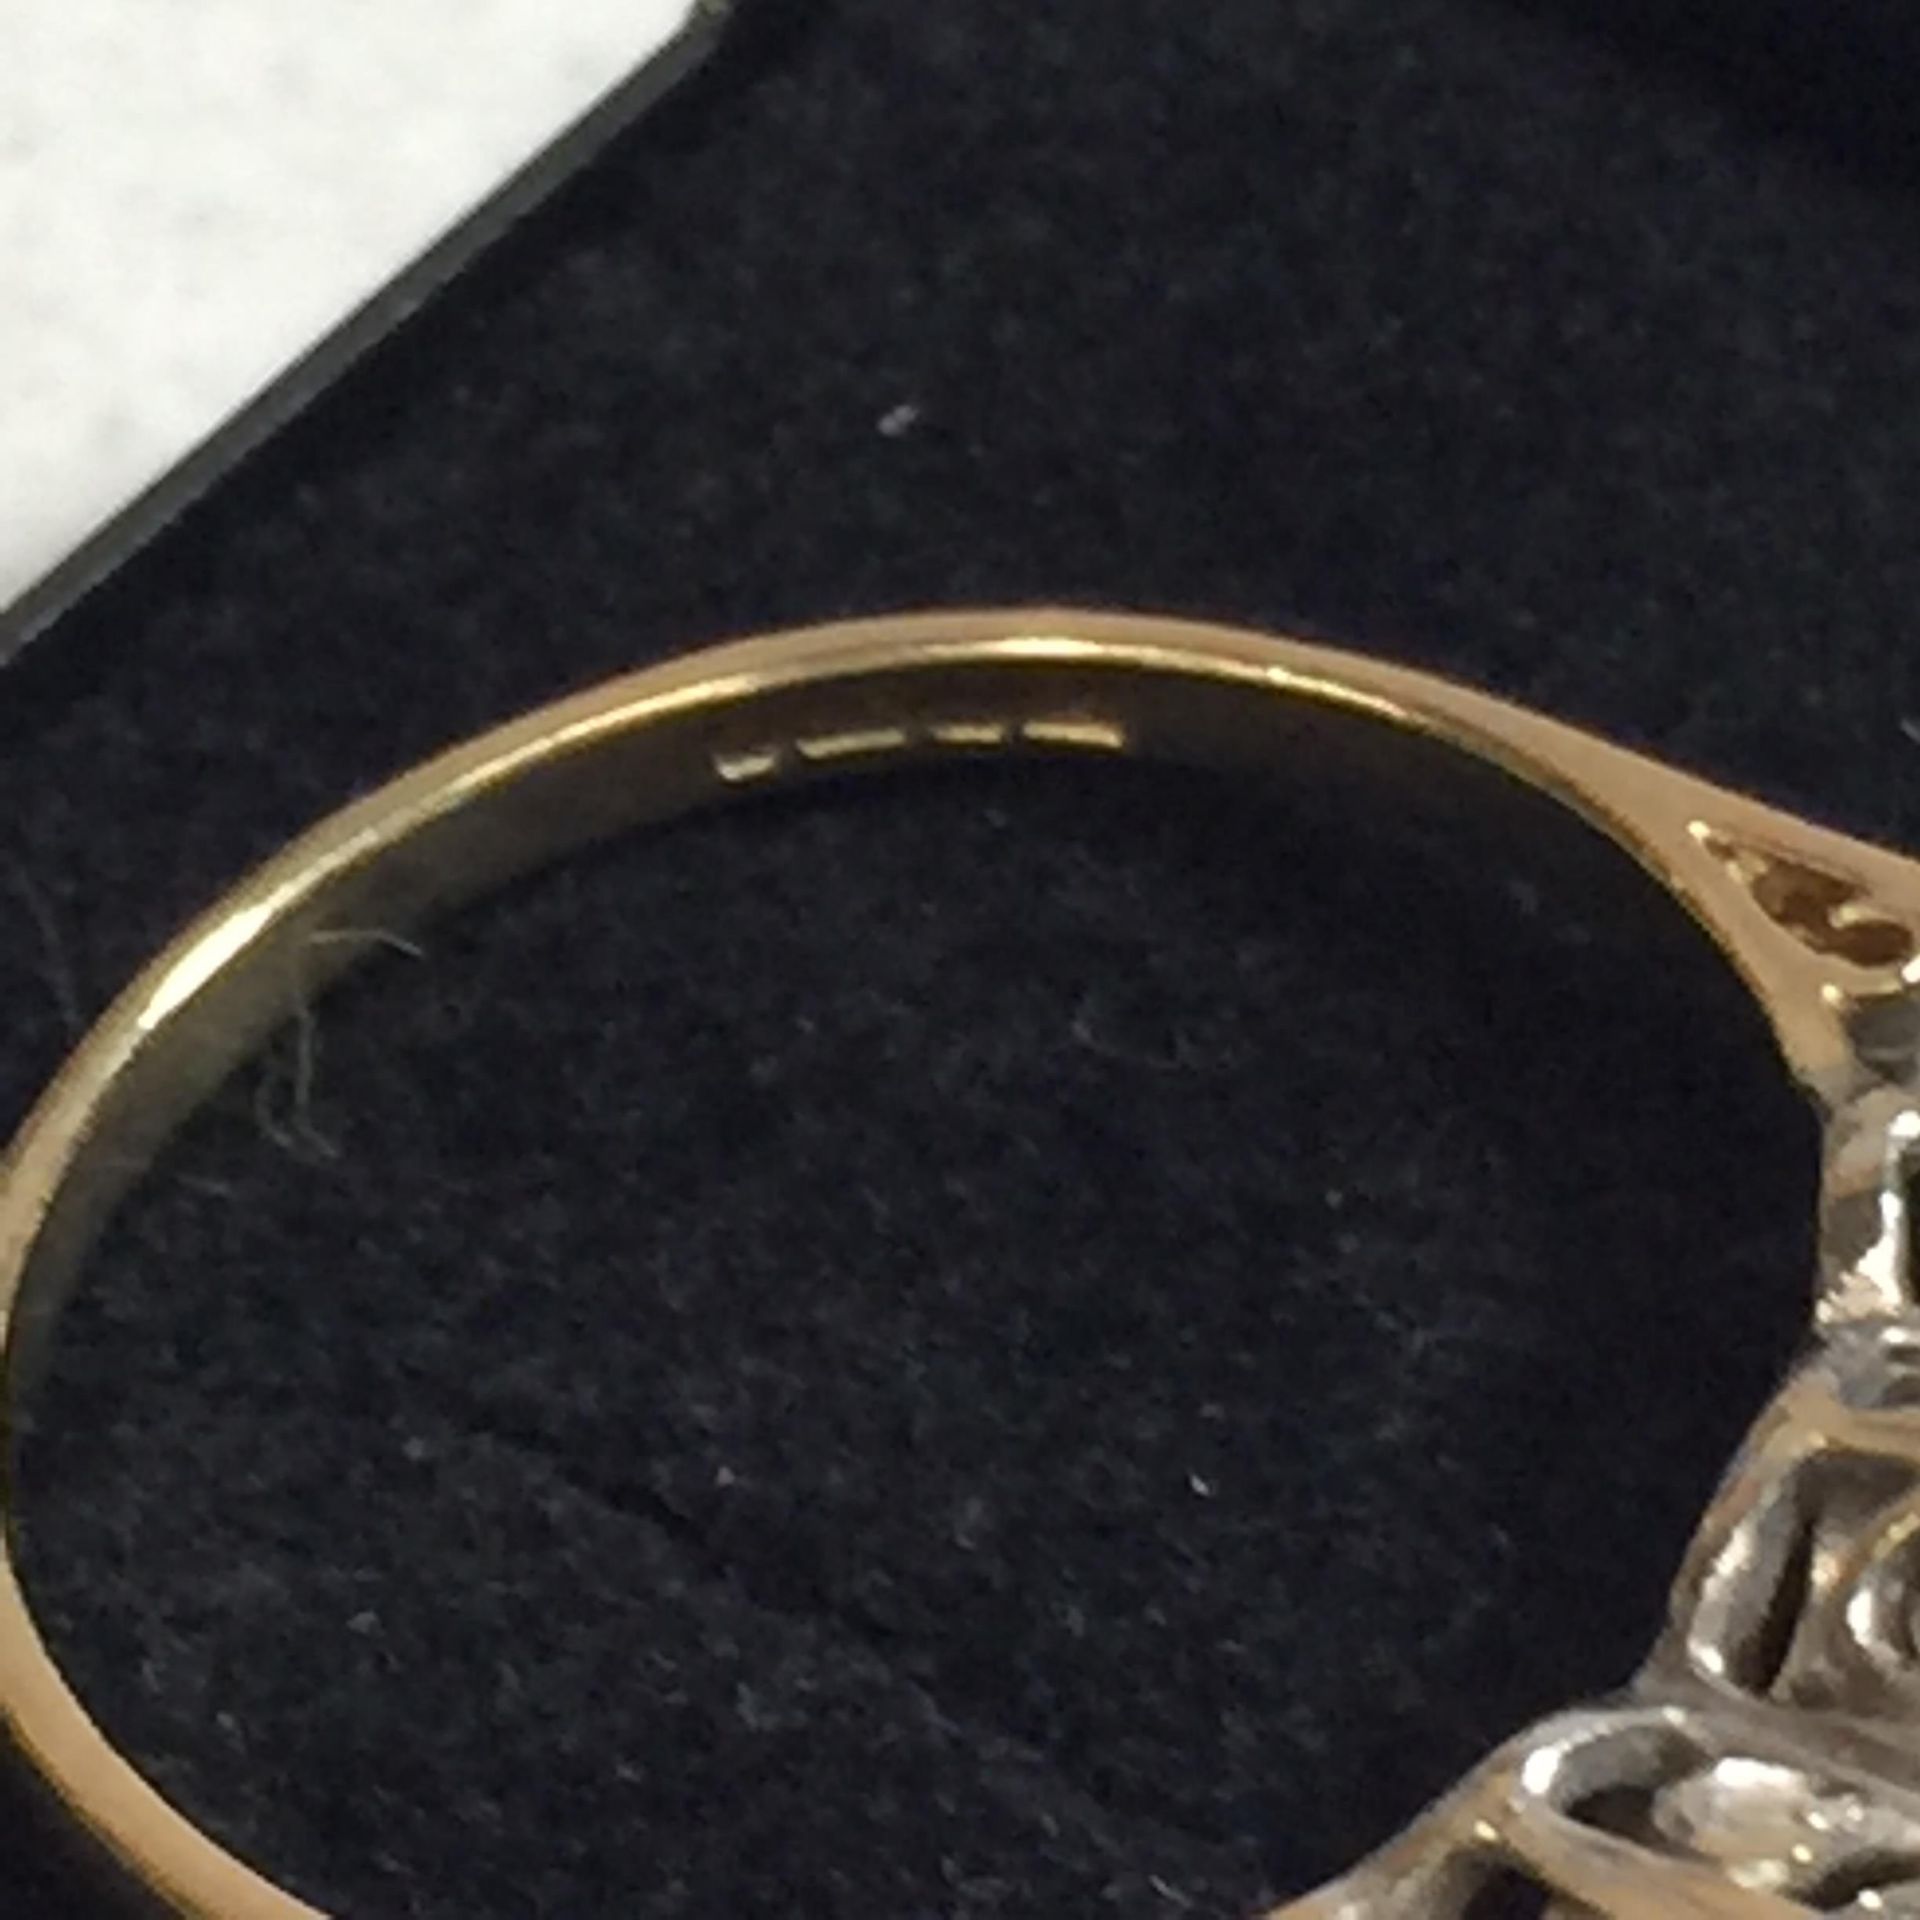 A 9CT GOLD RING WITH 3 CZ STONES,WEIGHT 2.4G, SIZE N - Image 3 of 3